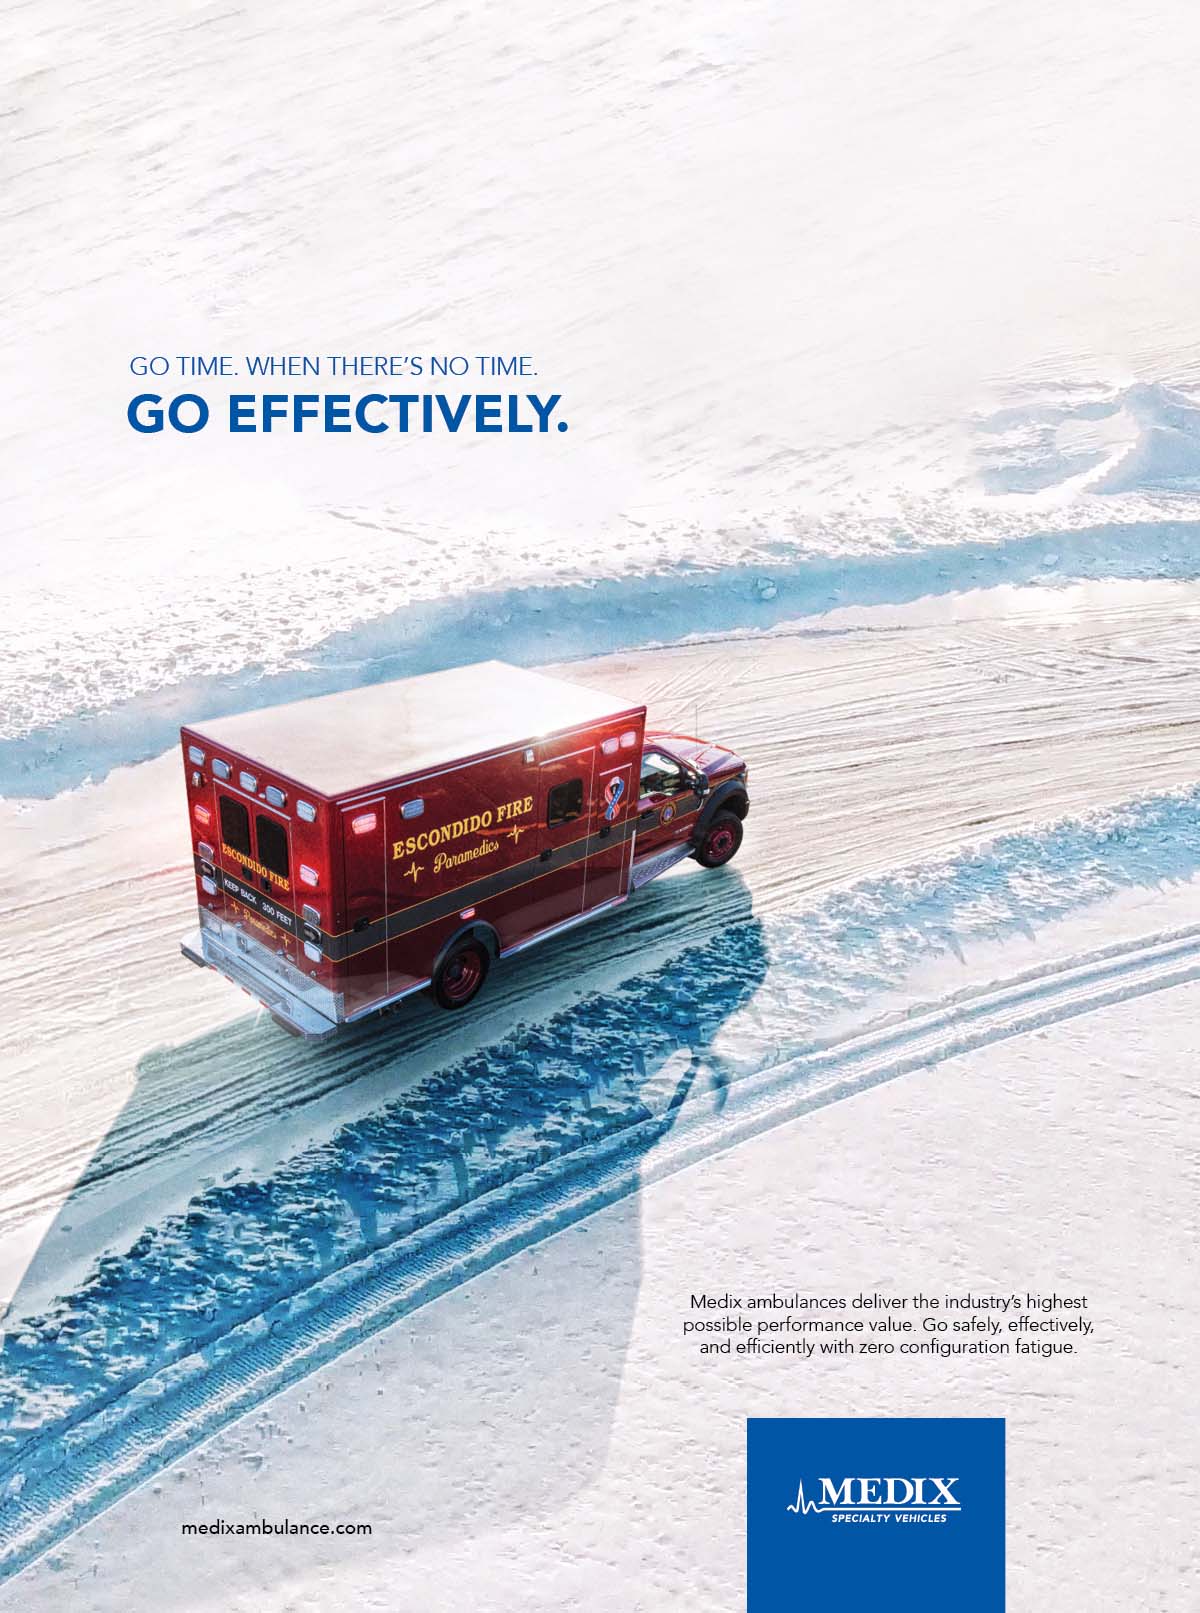 A red Medix ambulance drives around a turn on a snow covered road in the winter